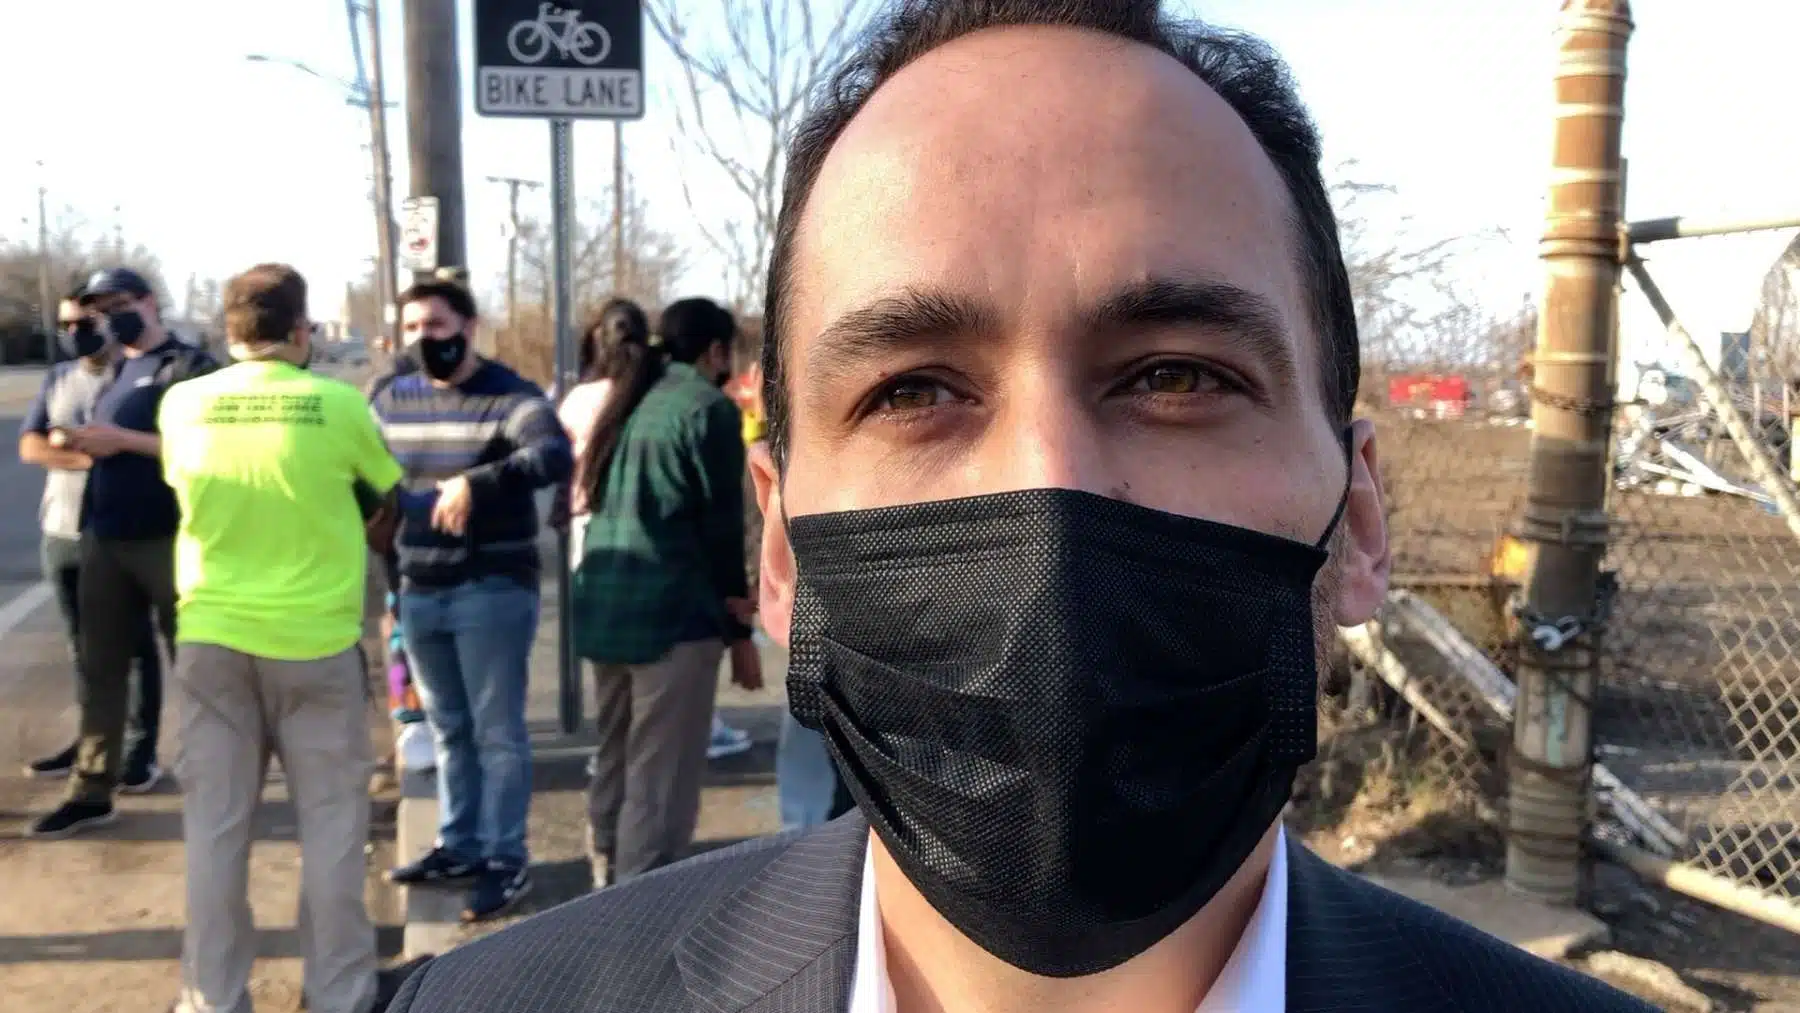 Interview: Gonzalo Cuervo is running for Mayor of Providence promising solutions, not talk